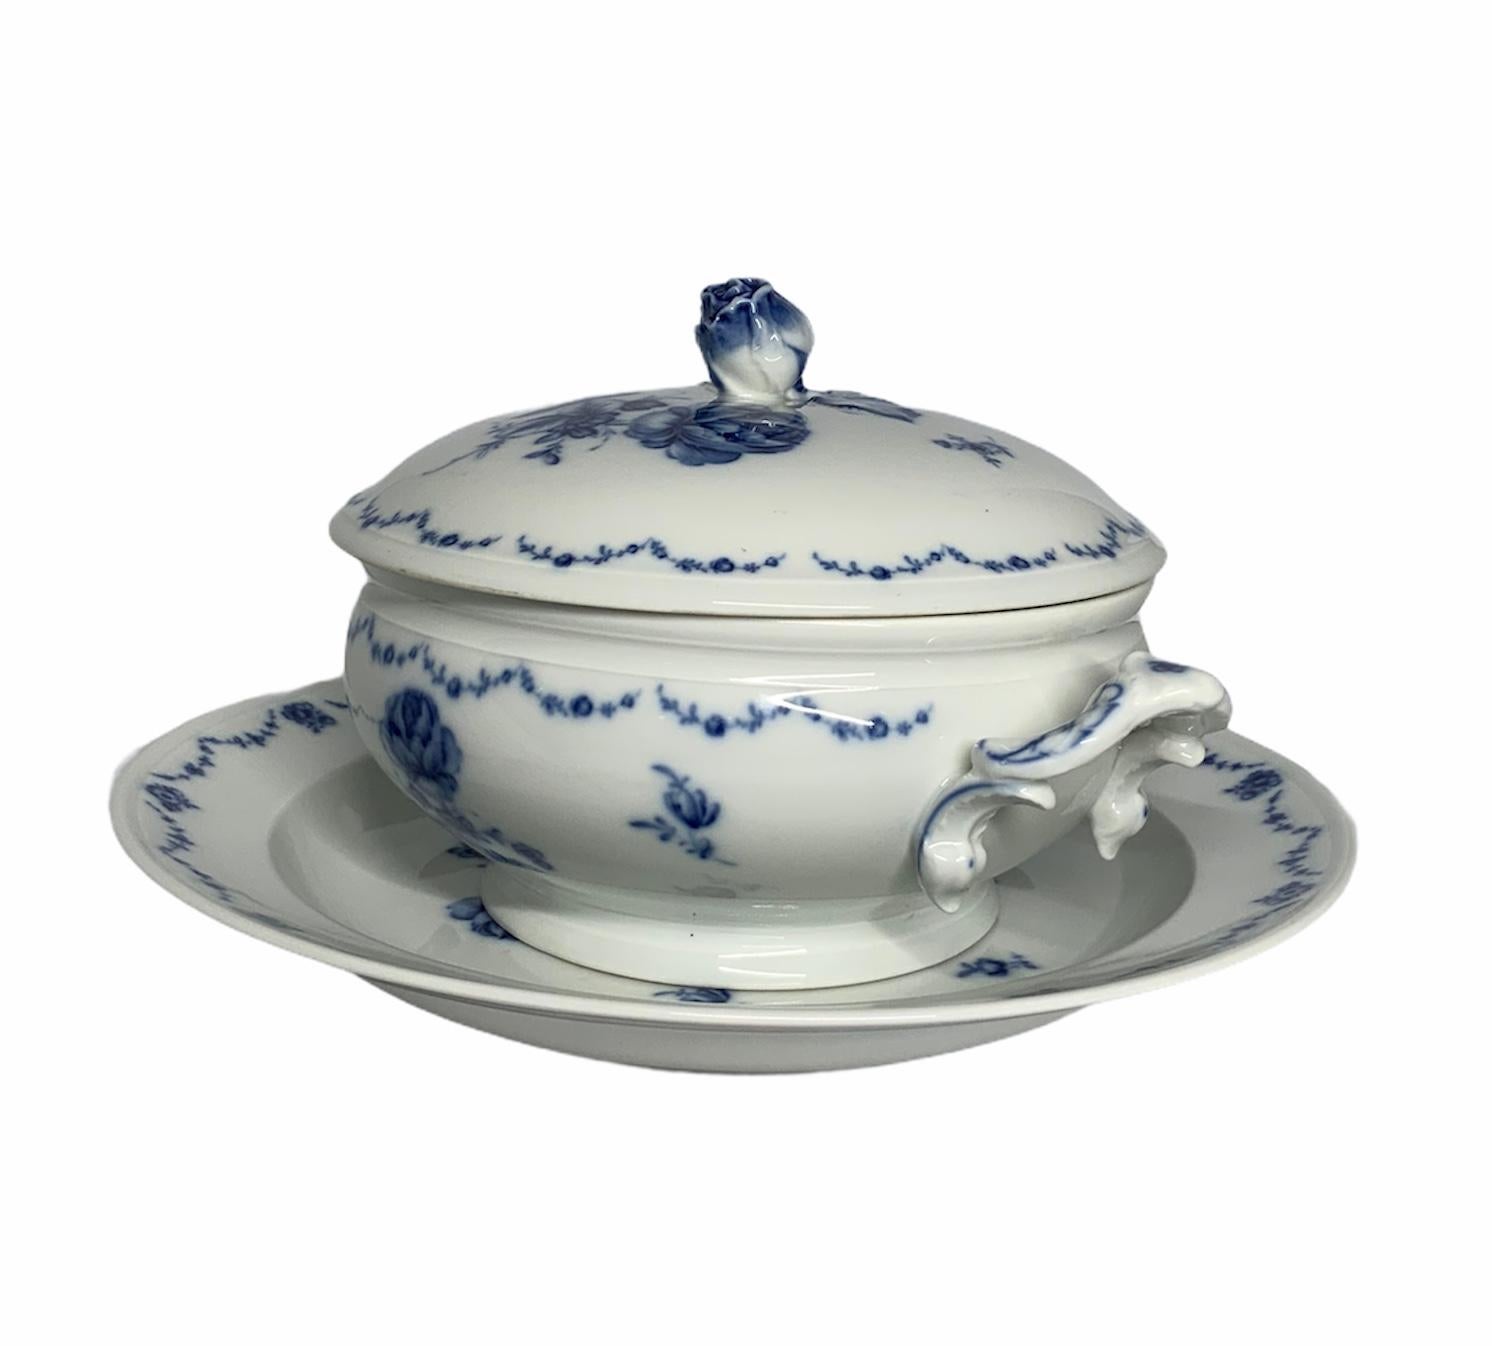 This is an Alt Furstenberg Lottine porcelain white tureen decorated with royal blue roses and foliage. There are garlands with this pattern adorning the borders of the lid, the bowl and the plate. The tureen has scrolls handles at each side